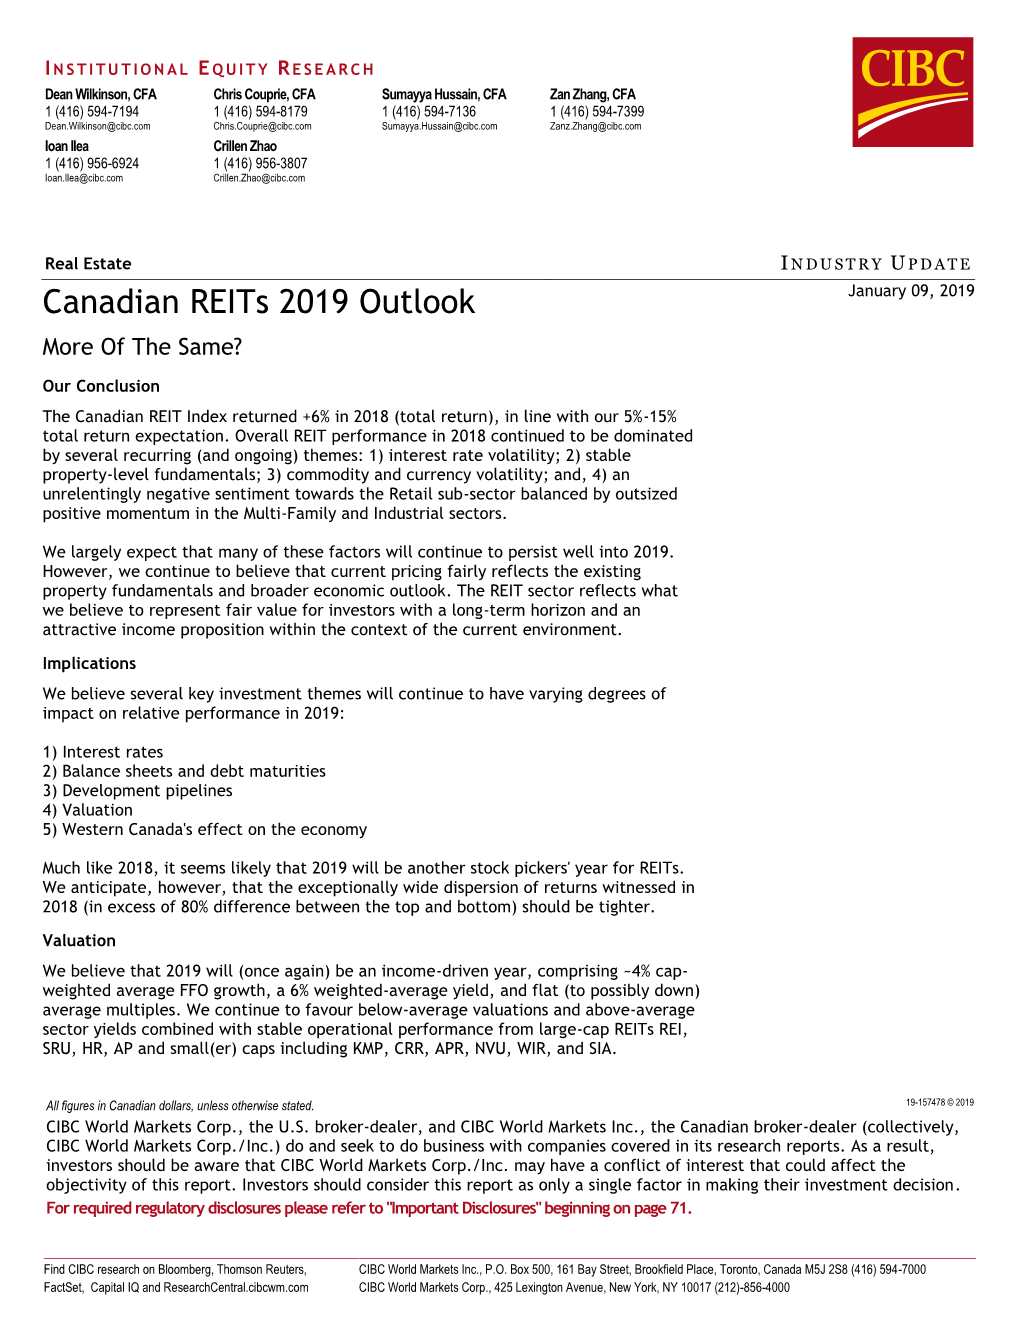 Canadian Reits 2019 Outlook More of the Same?